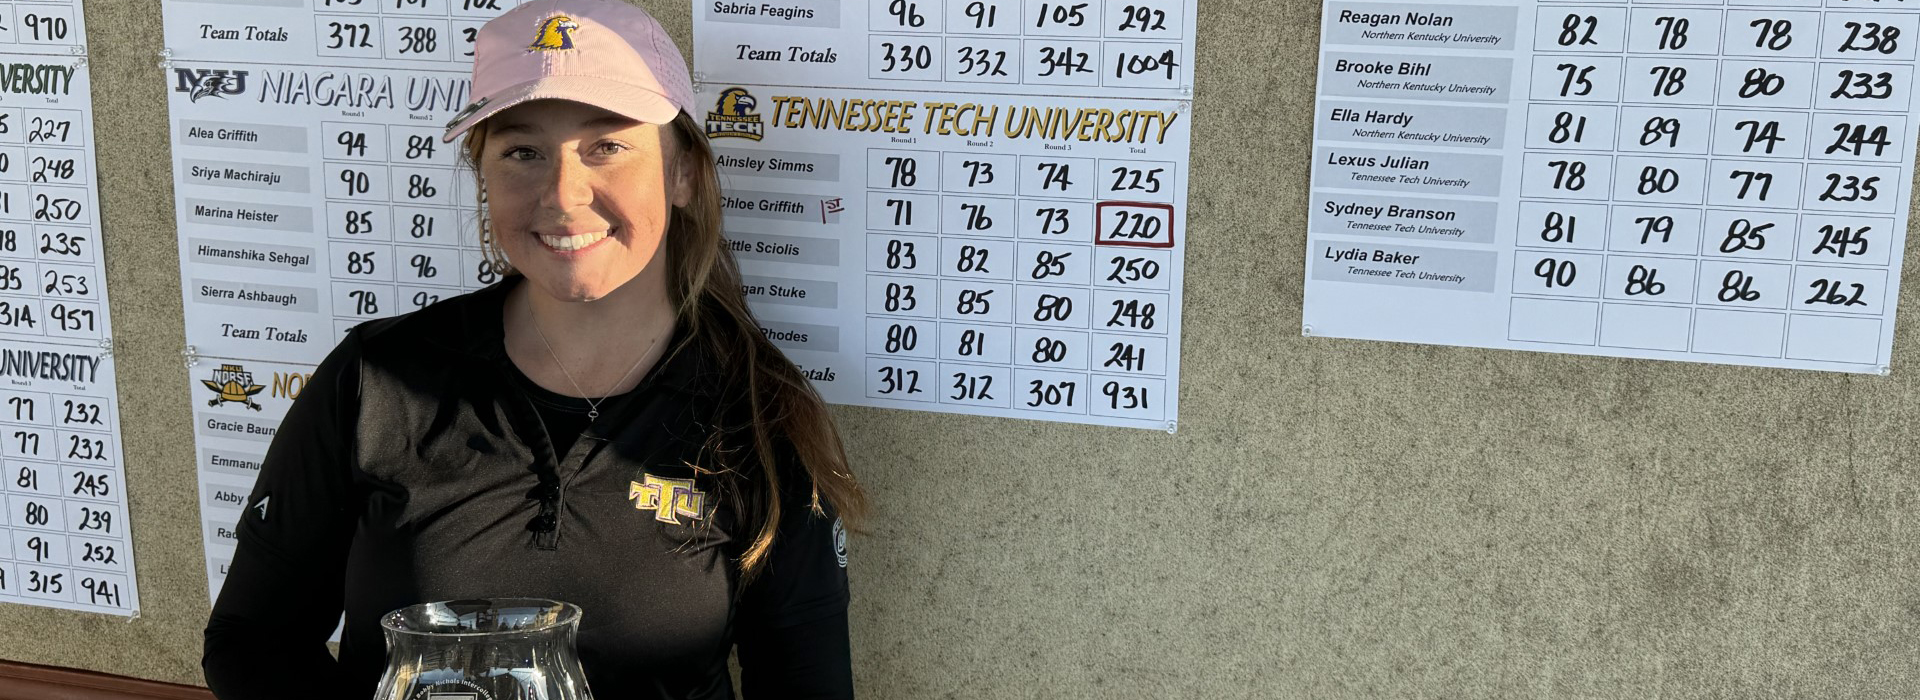 Griffith's medalist honor propels Tech to runner-up showing at Bobby Nichols Intercollegiate